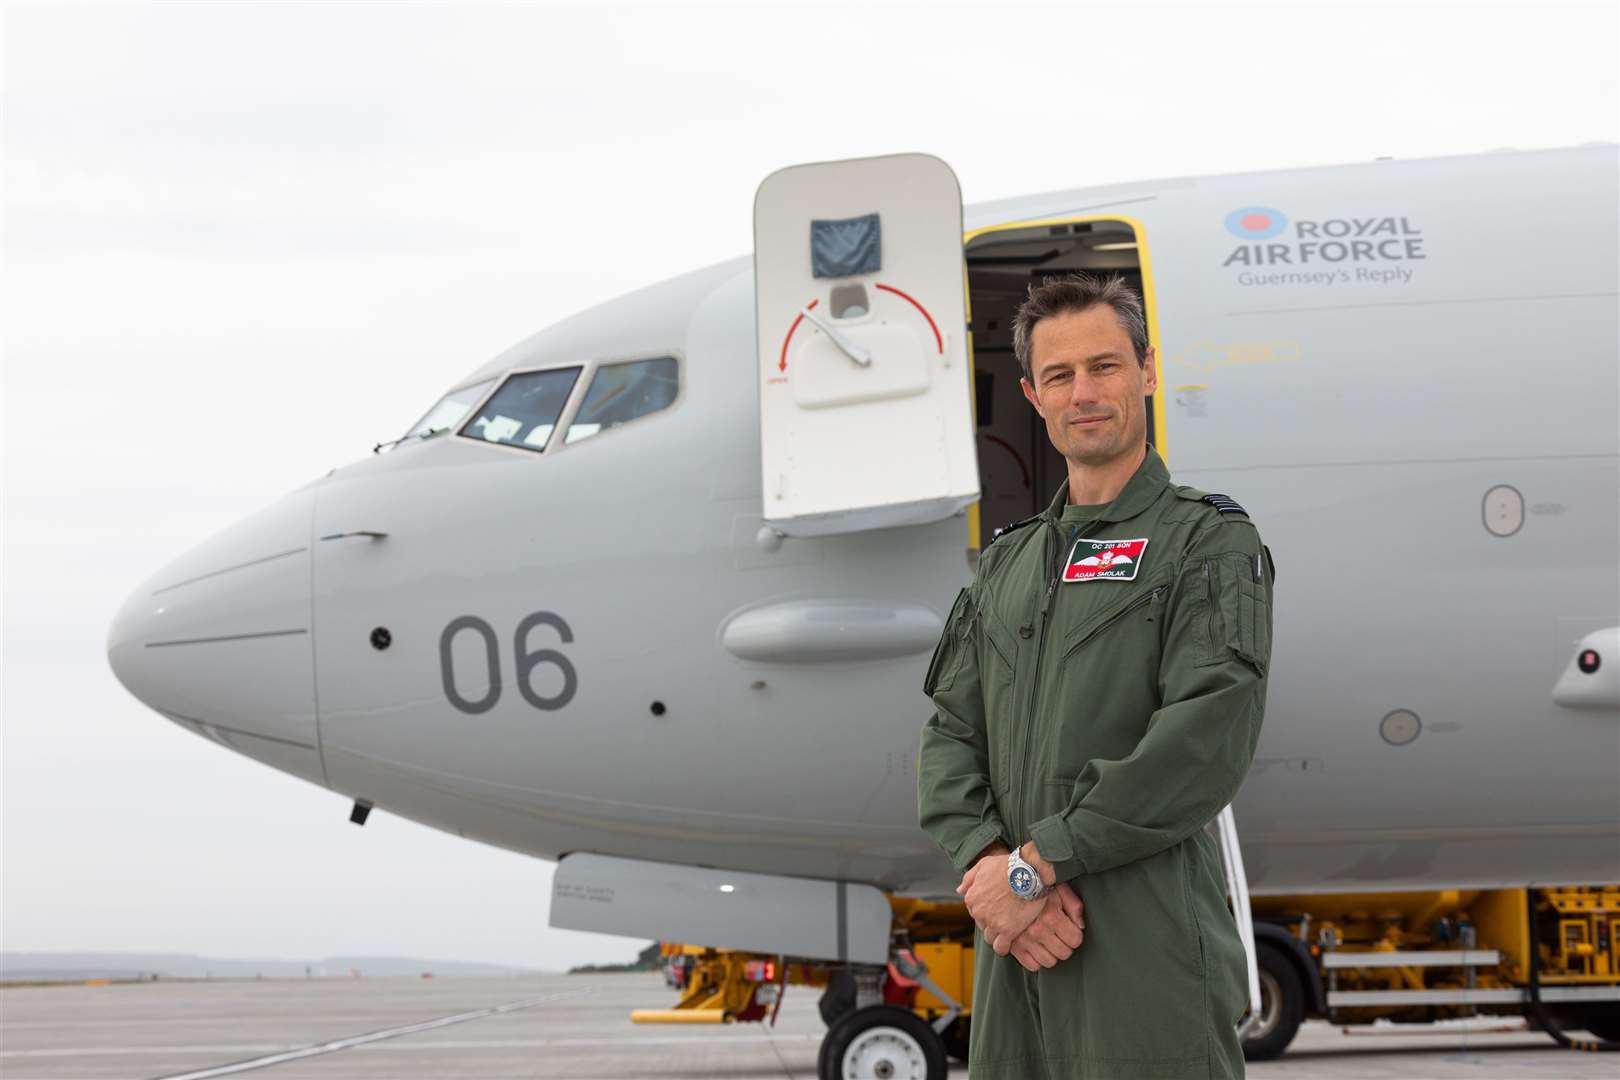 Wing Commander Adam Smolak, Officer Commanding 201 Squadron, in front of the newest aircraft to arrive at RAF Lossimeouth, Guernsey's Reply.